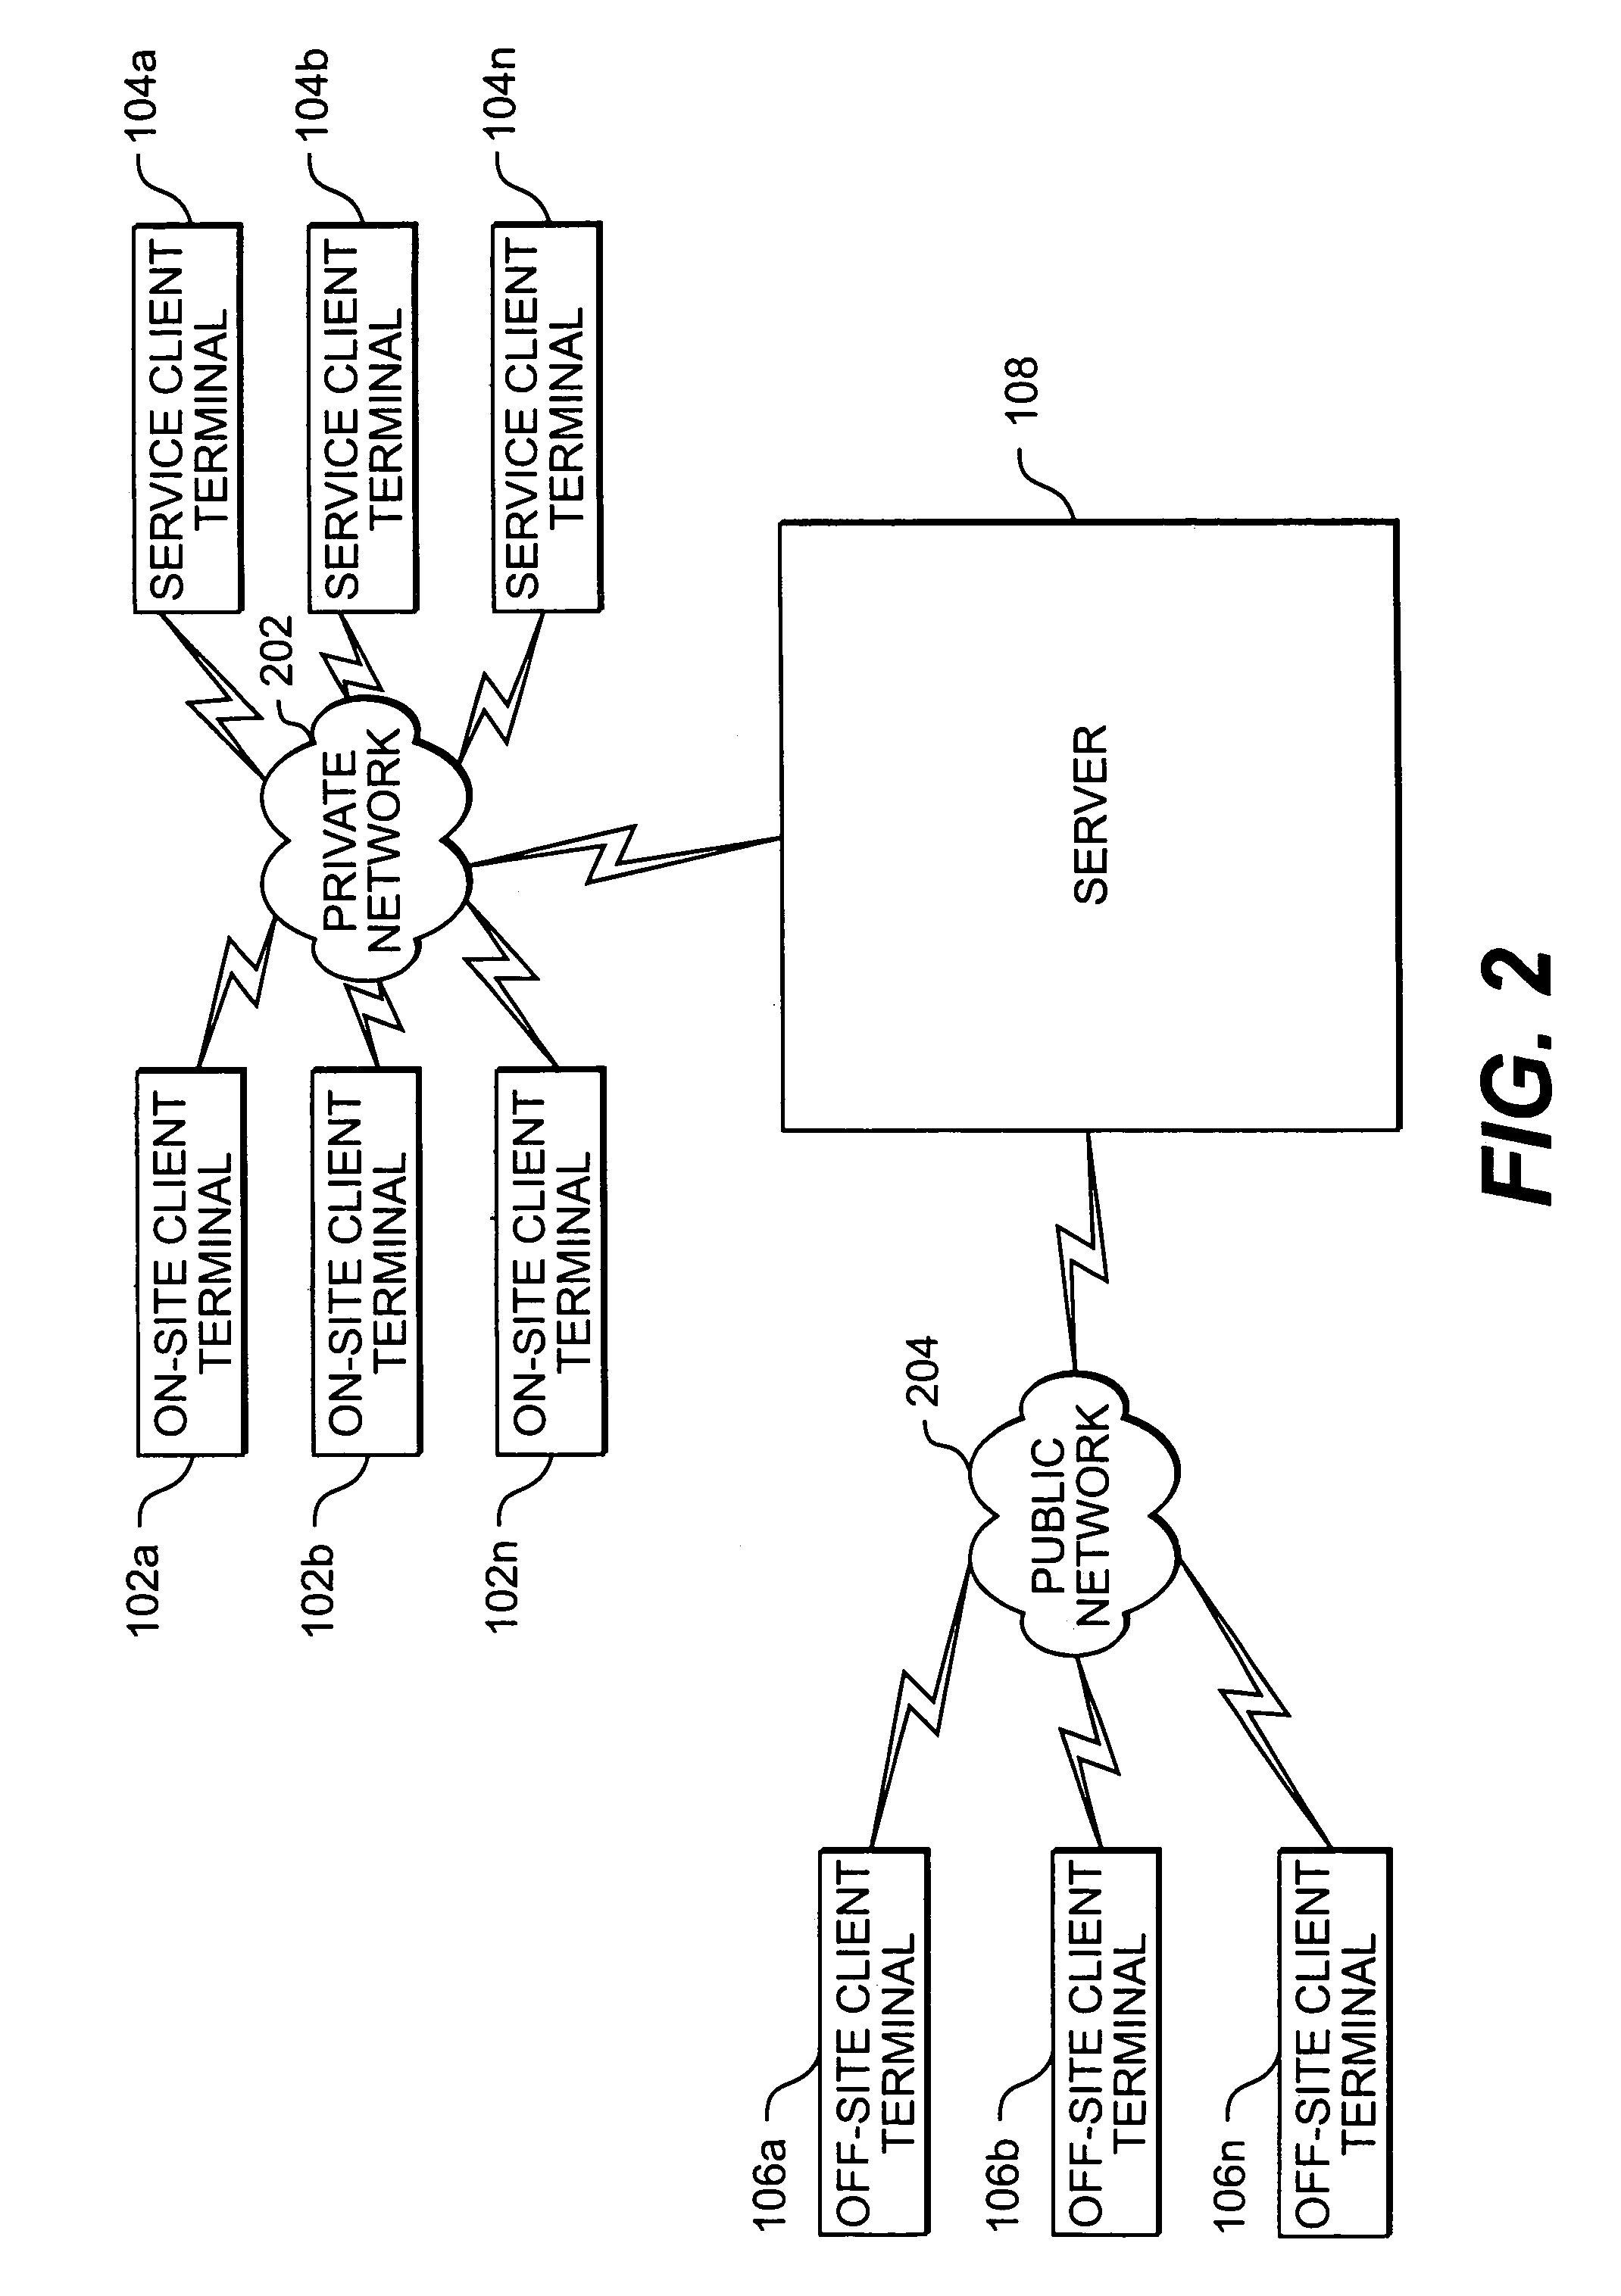 System, method, and article of manufacture for gaming from an off-site location